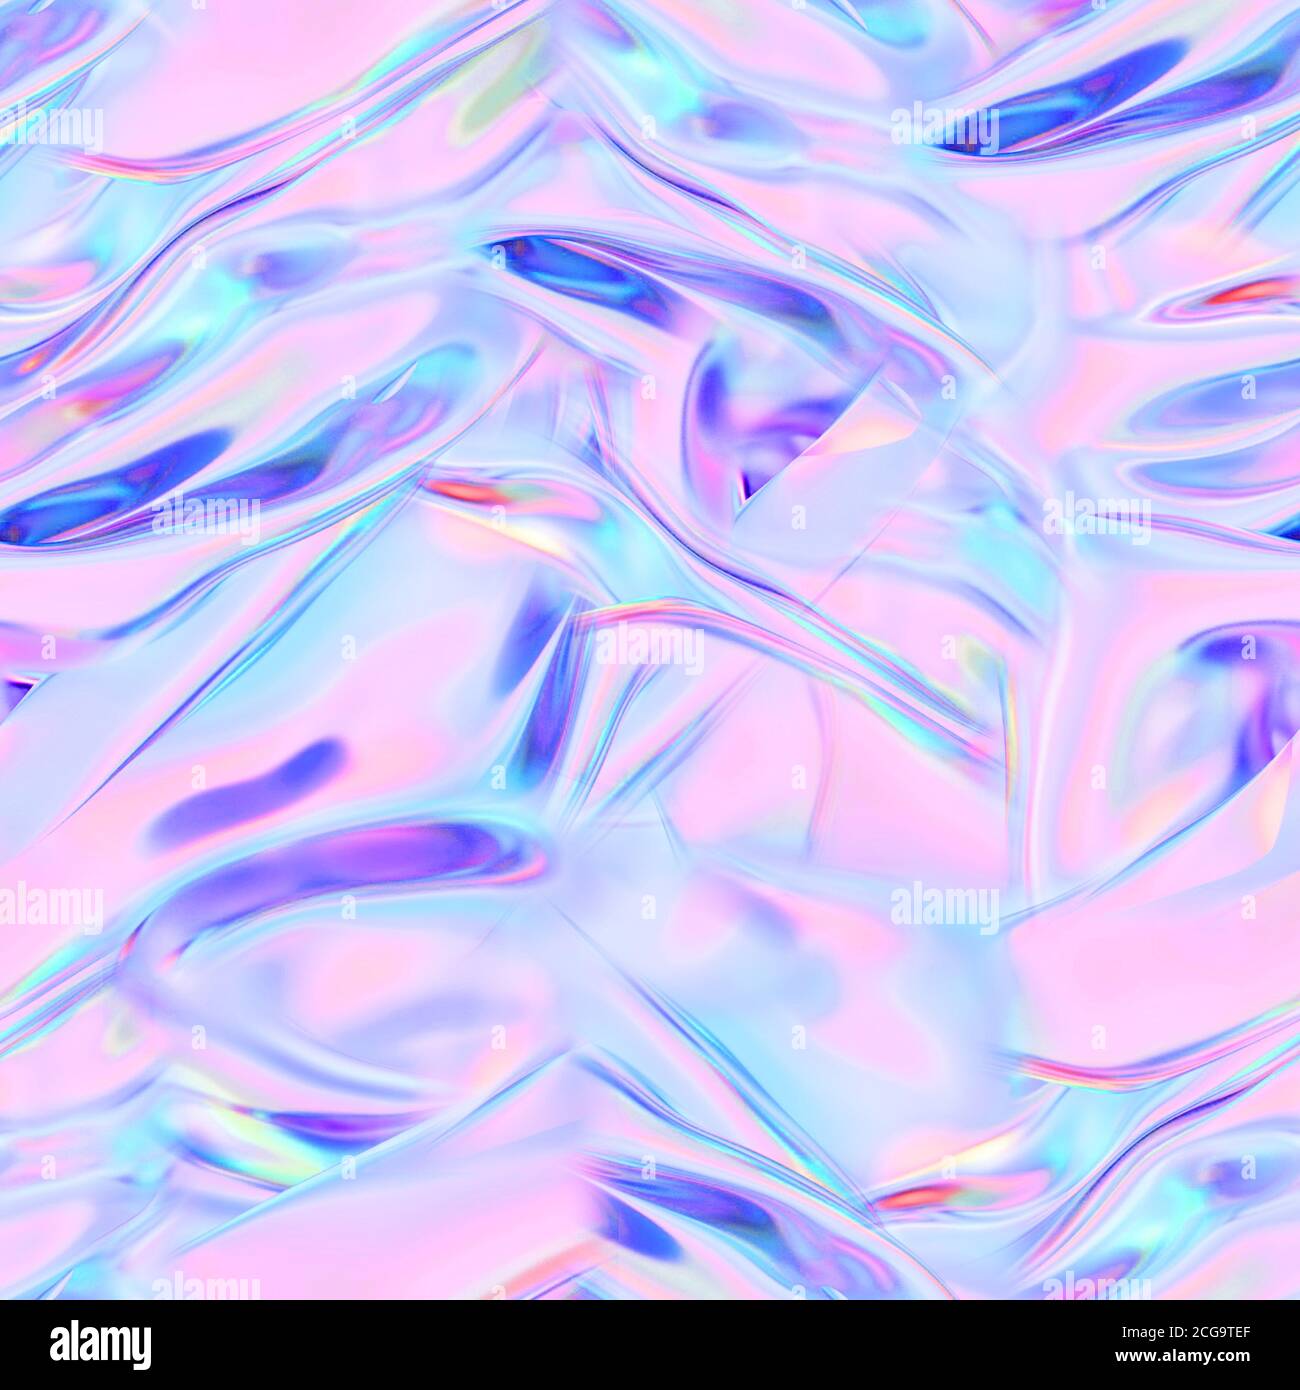 Holographic Abstract Print Stock Photo